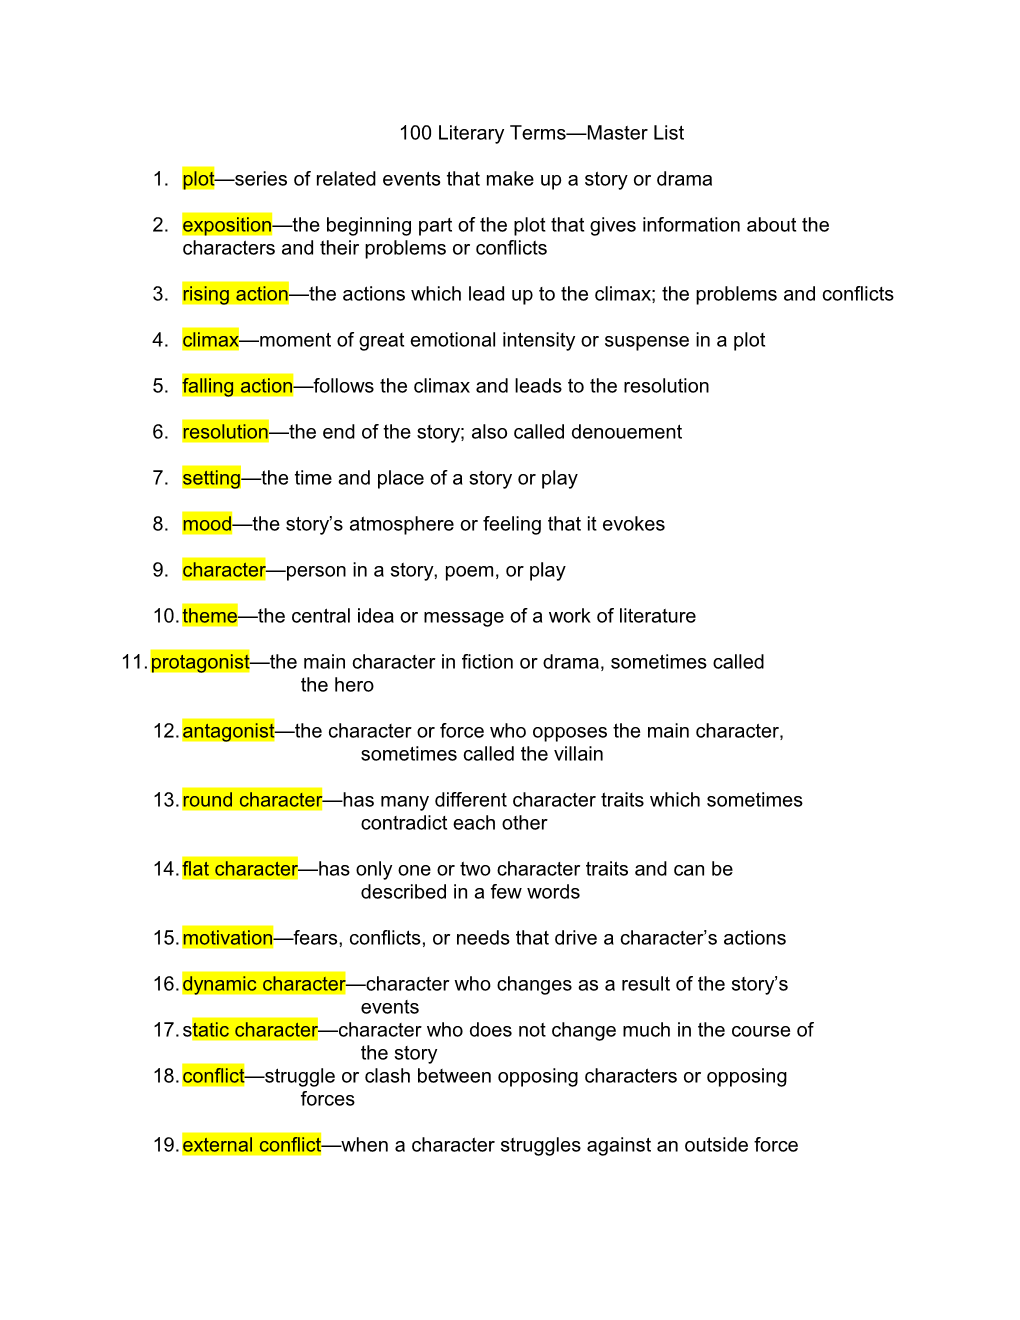 100 Literary Terms Master List